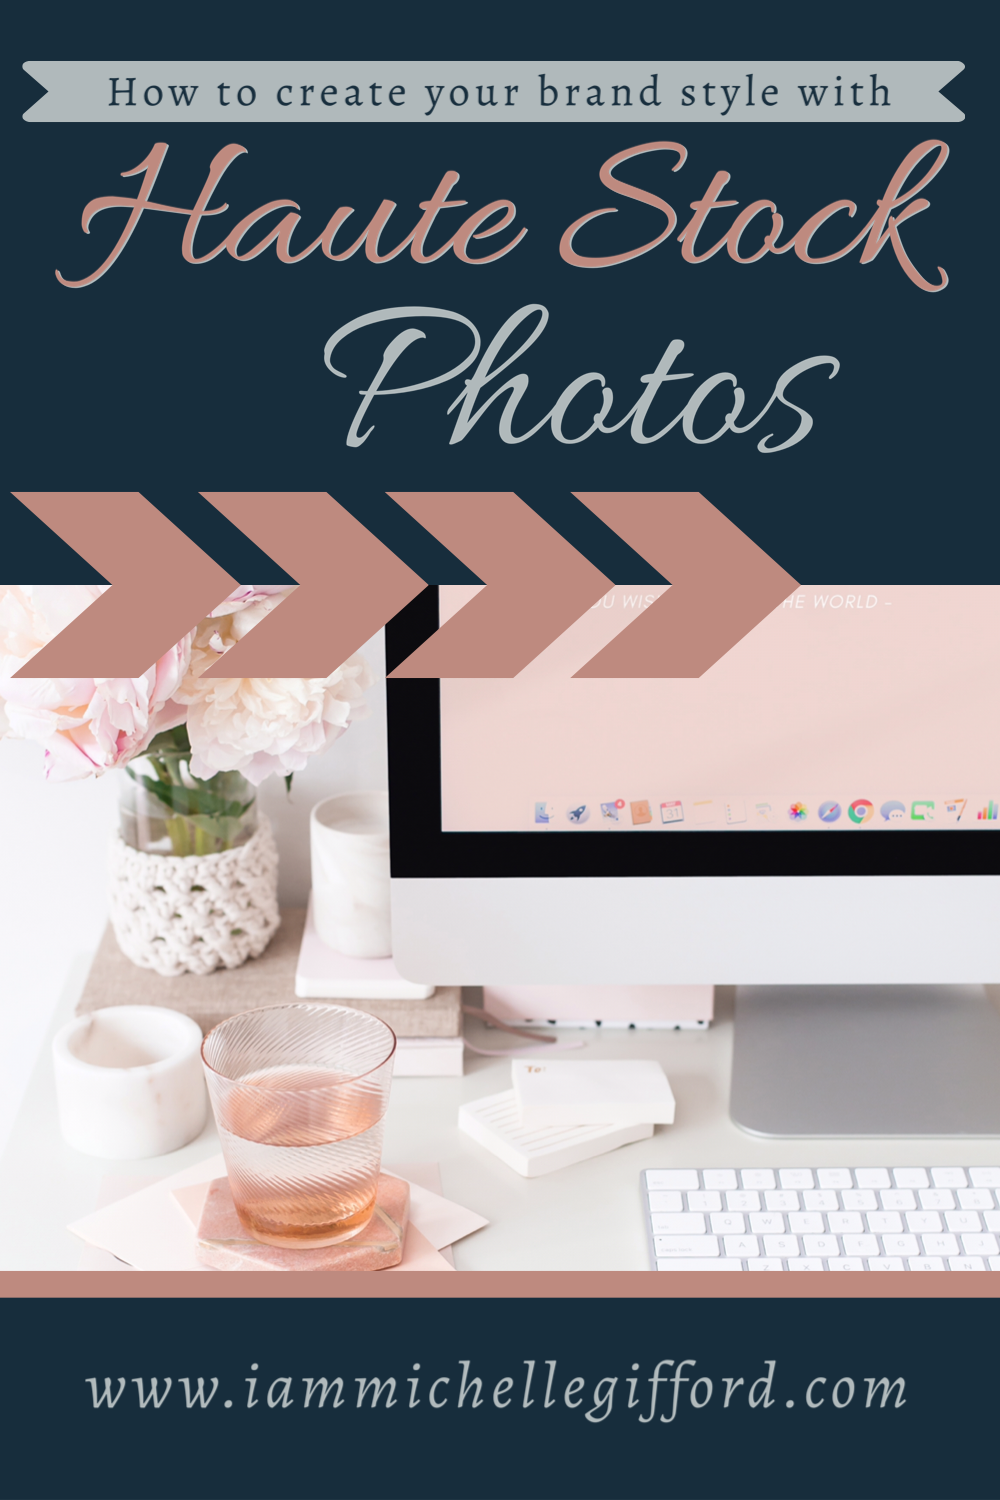 How I Use Haute Stock Photos to Create My Brand Style Tips for Developing Business Brand www.iammichellegifford.com